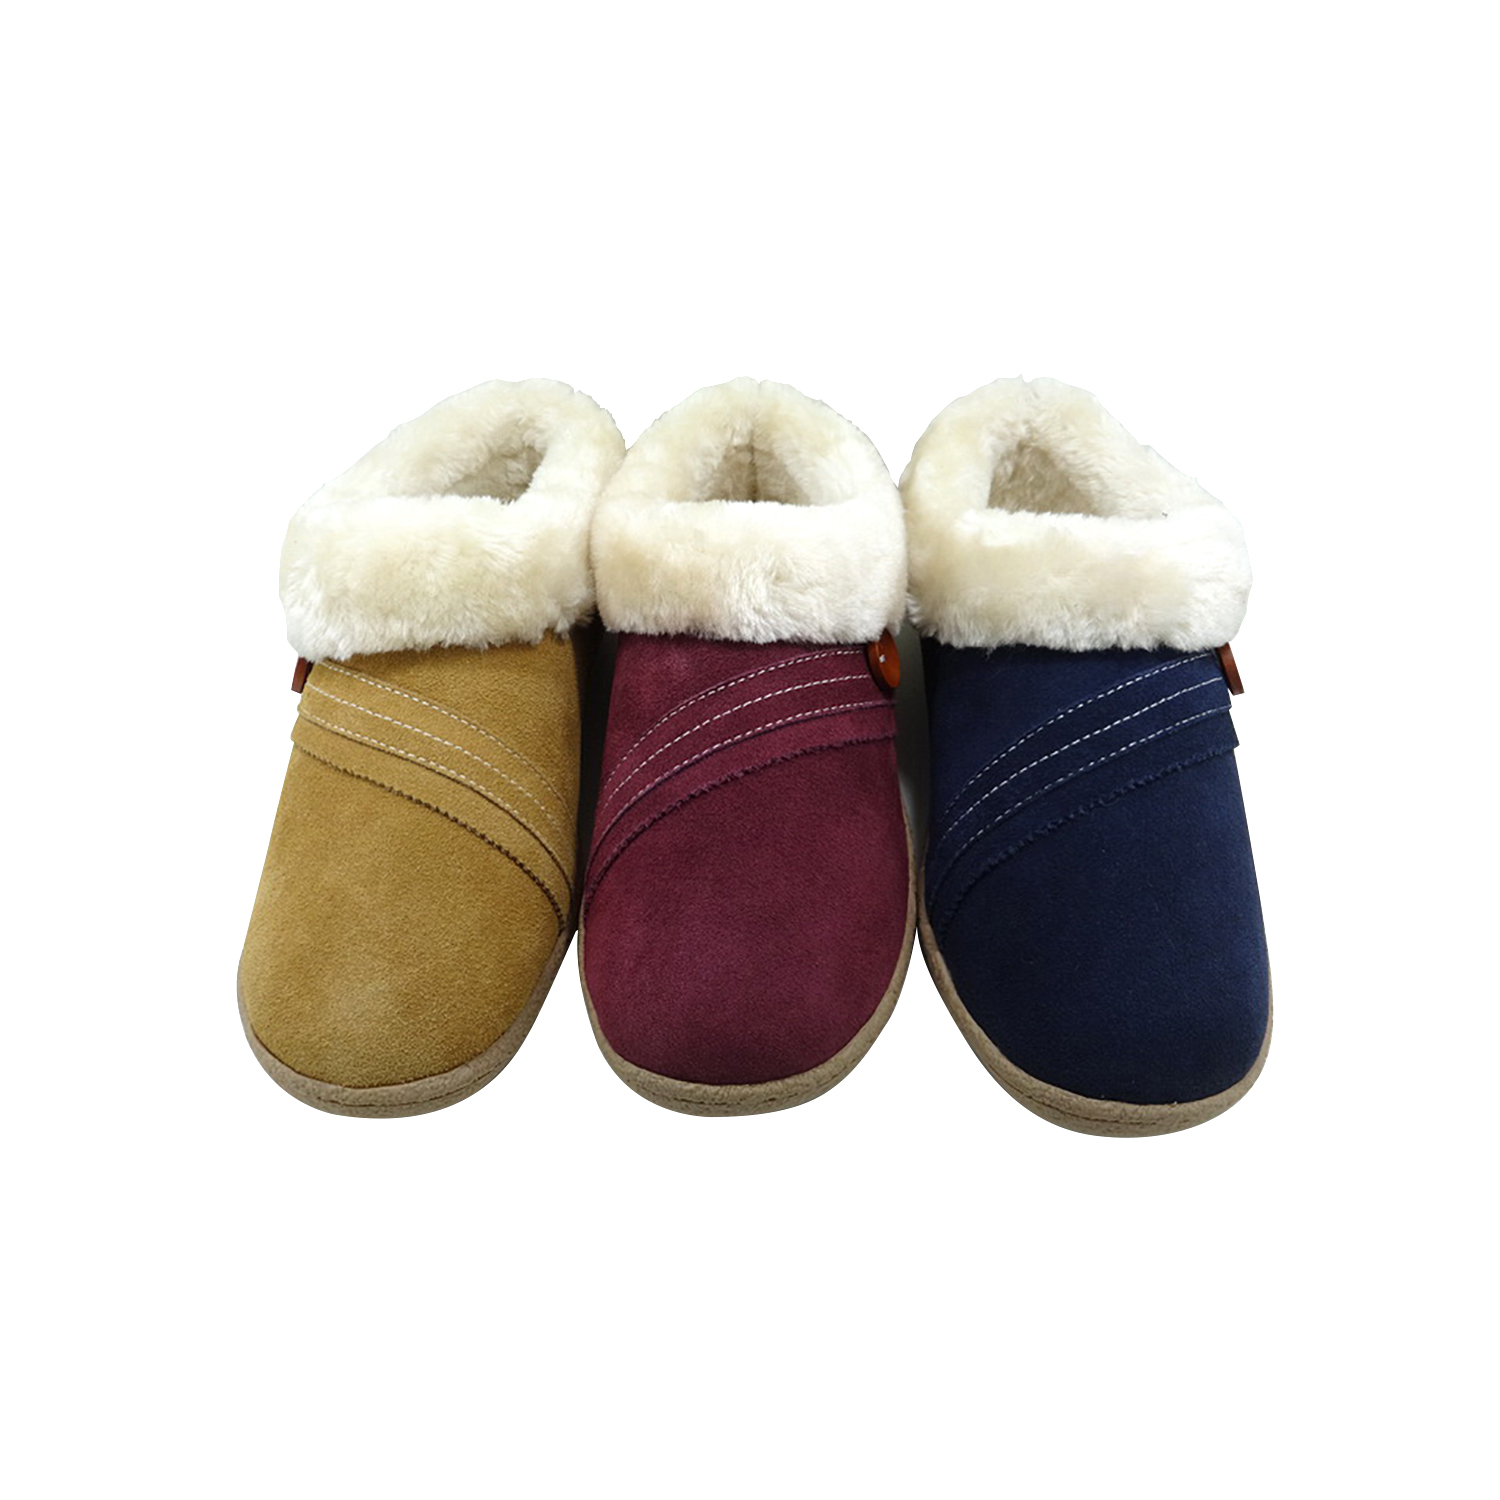 Women's Leather Suede Slippers Indoor Outdoor Casual Shoes